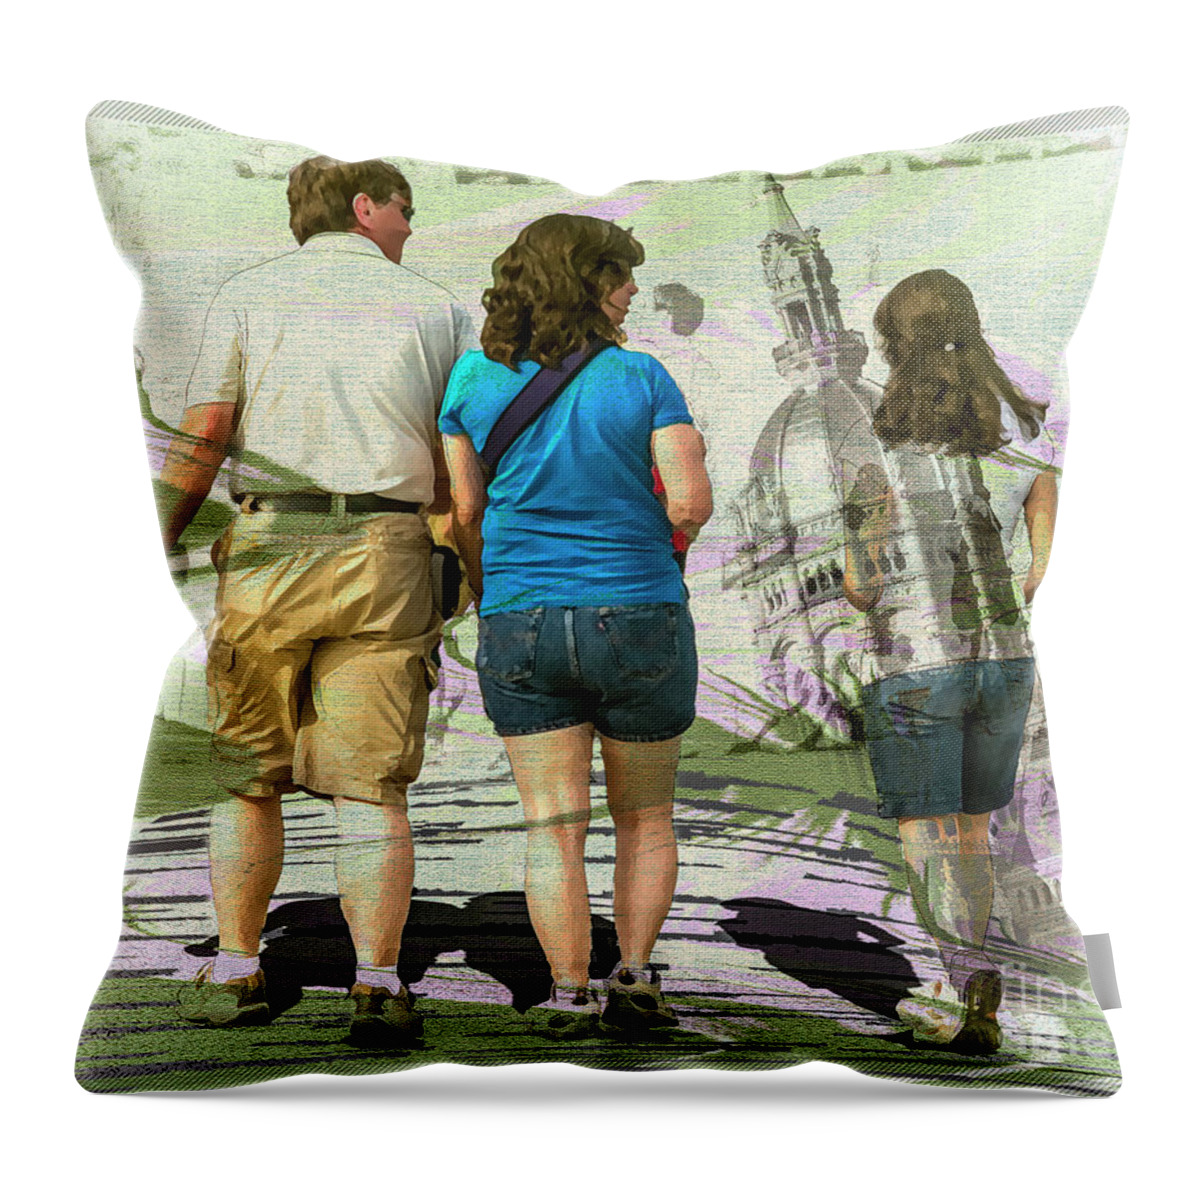 Digital Throw Pillow featuring the digital art Tourists by Anthony Ellis